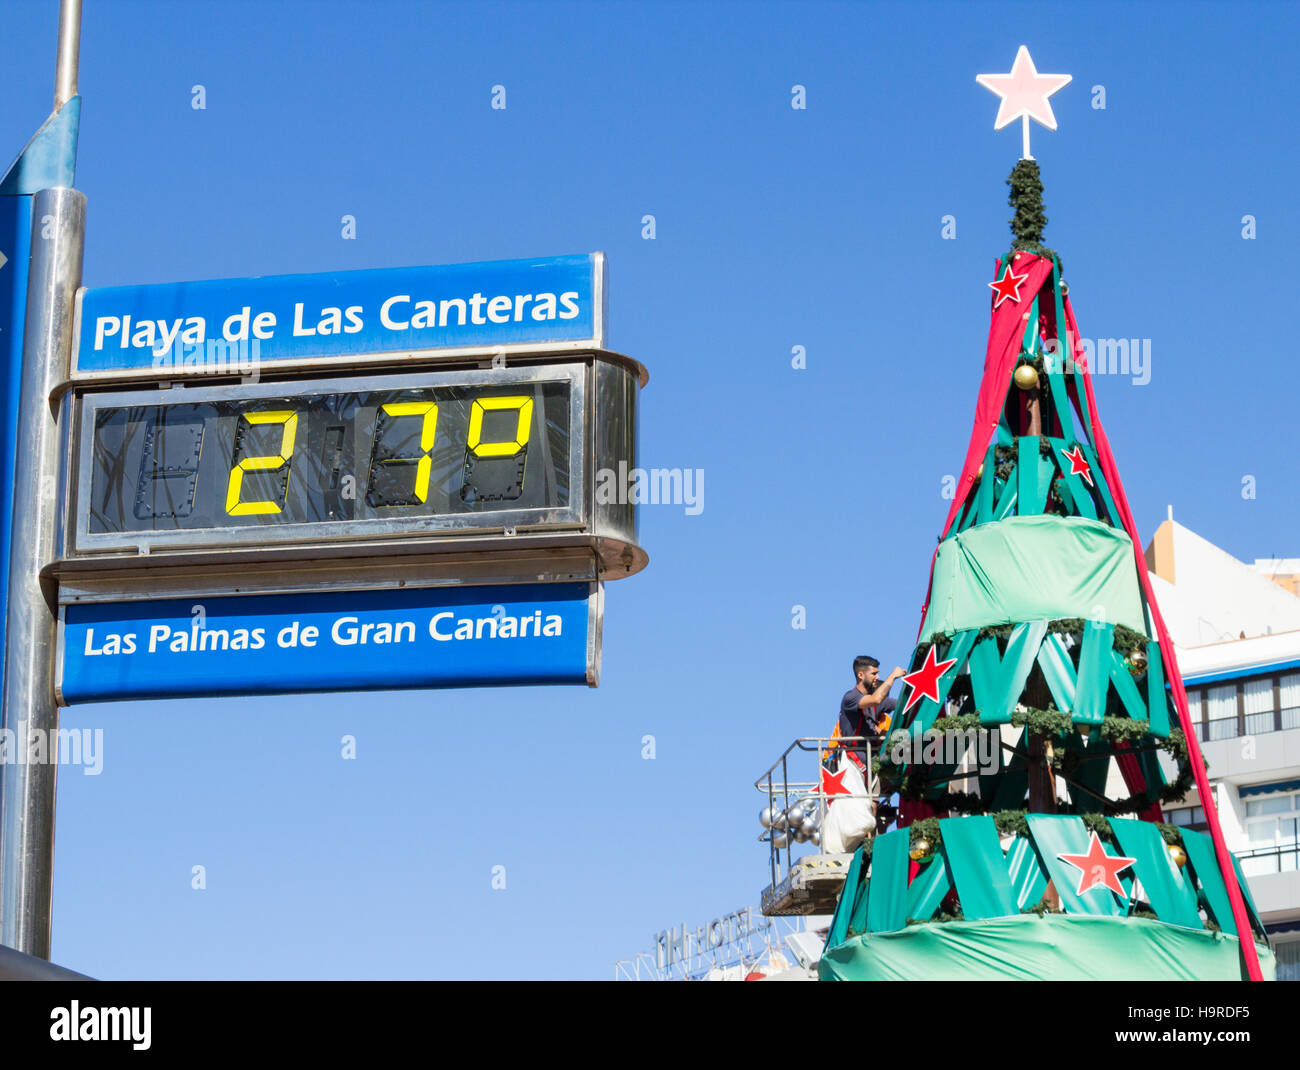 Las Palmas, Gran Canaria, Canary Islands, Spain. 25th November, 2016. Weather: A glorious Friday morning on the city beach in Las Palmas as the beach Christmas tree is decorated and mid morning temperatures hit 27 degrees Celcius. Gran Canaria is a popular winter sun destination for many from the UK.  Las Palmas was ranked as the city with the best climate in the world in a 1996 scientific study called ‘Pleasant Weather Ratings’, by Thomas Whitmore, director of research on climatology at Syracuse University, New York. Credit:  Alan Dawson News/Alamy Live News Stock Photo